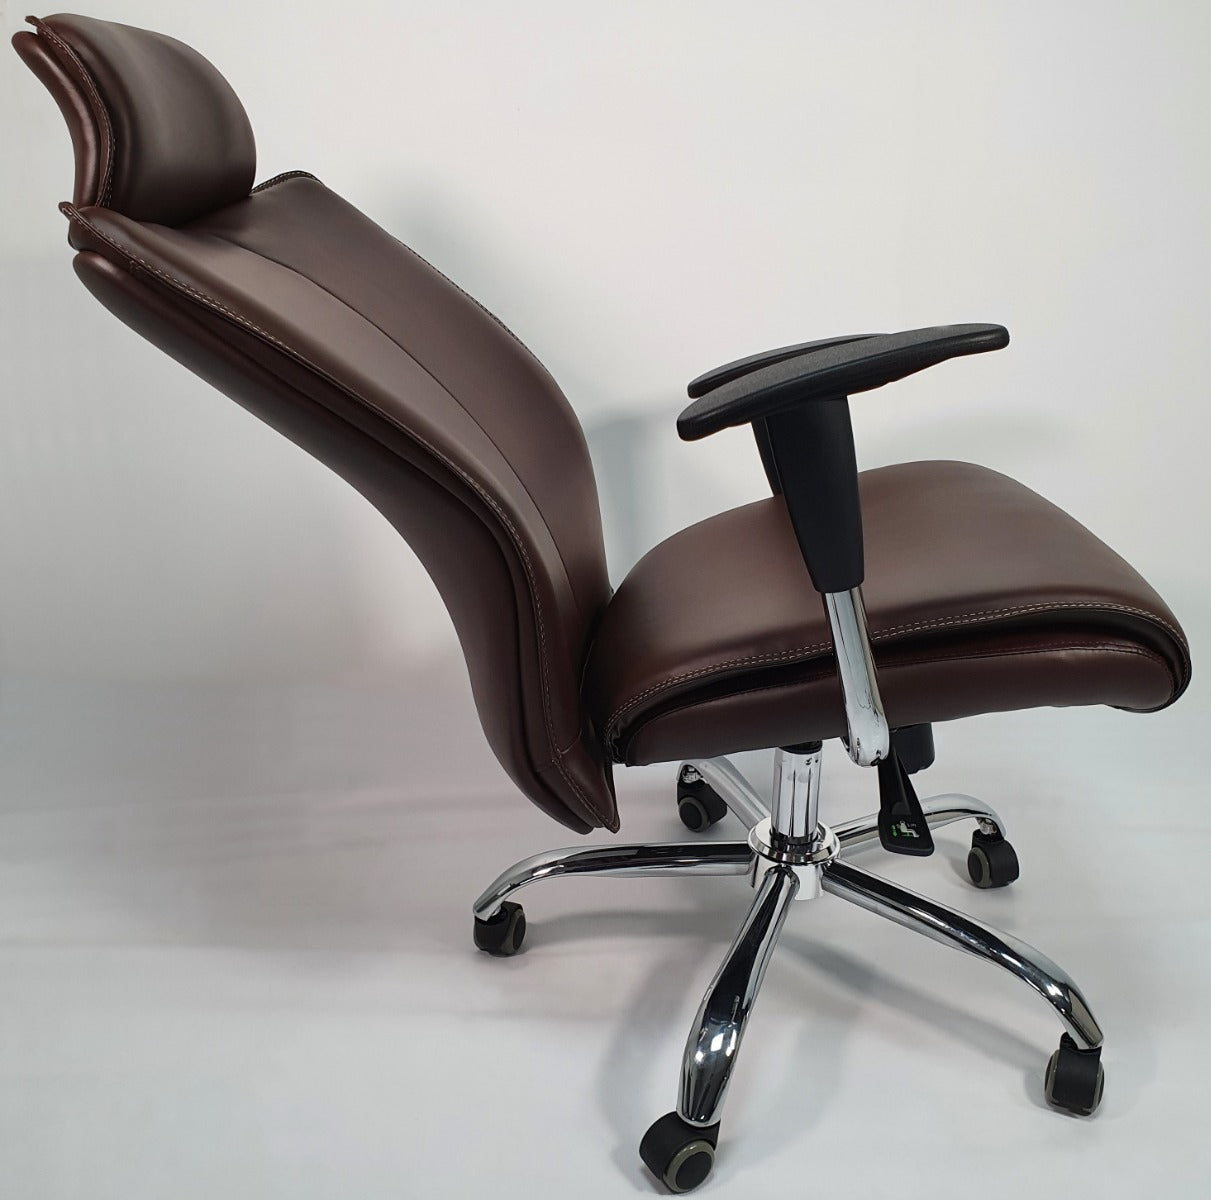 Executive Dark Brown Leather Office Chair - HB-020-BWN